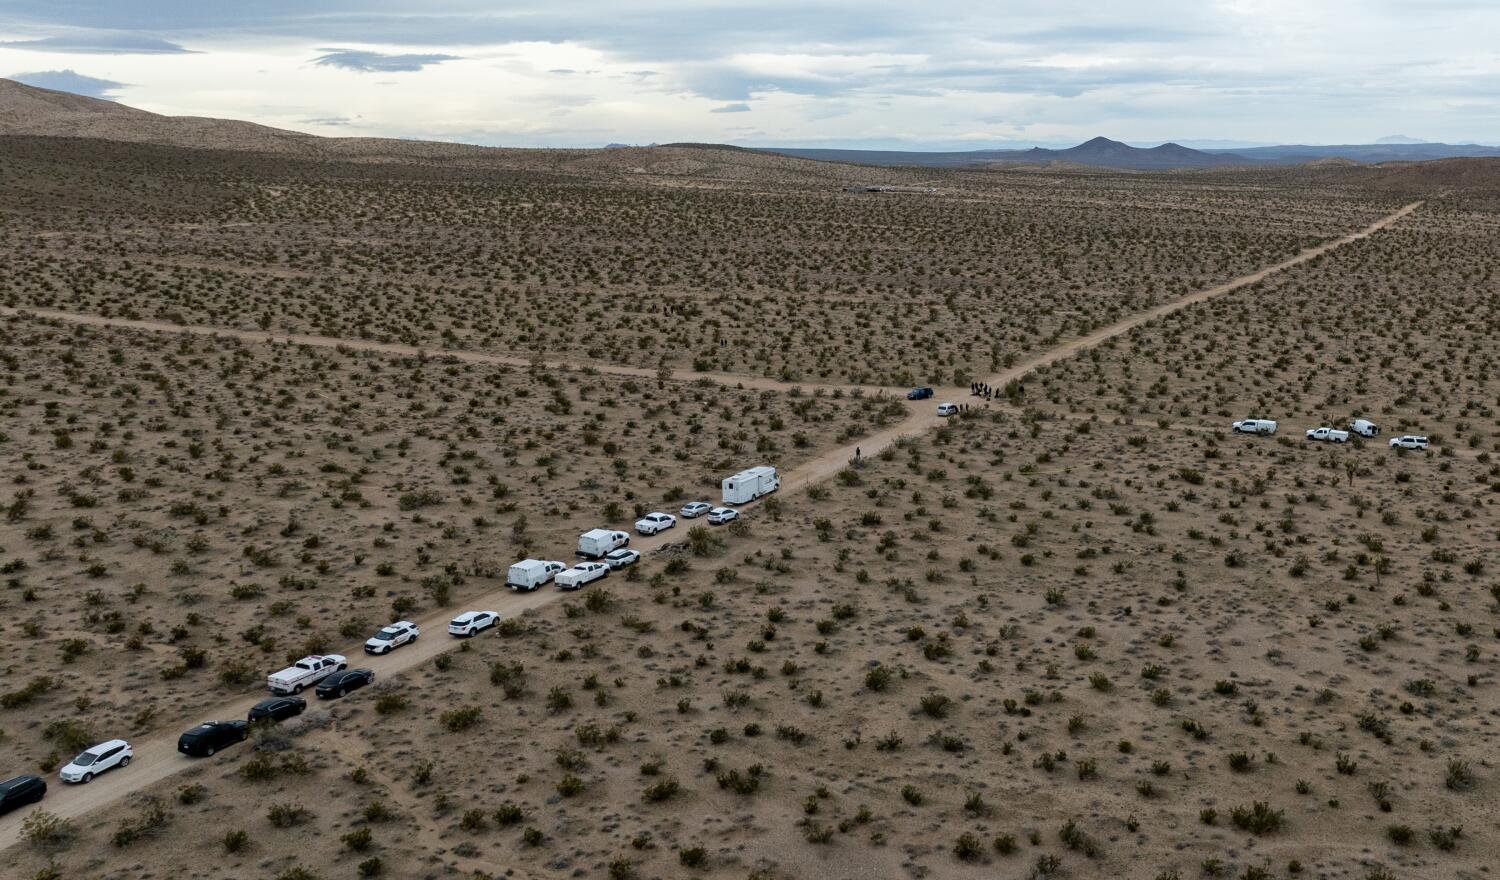 Mystery shrouds six bodies found in San Bernardino desert. Could it have been gang-motivated? 